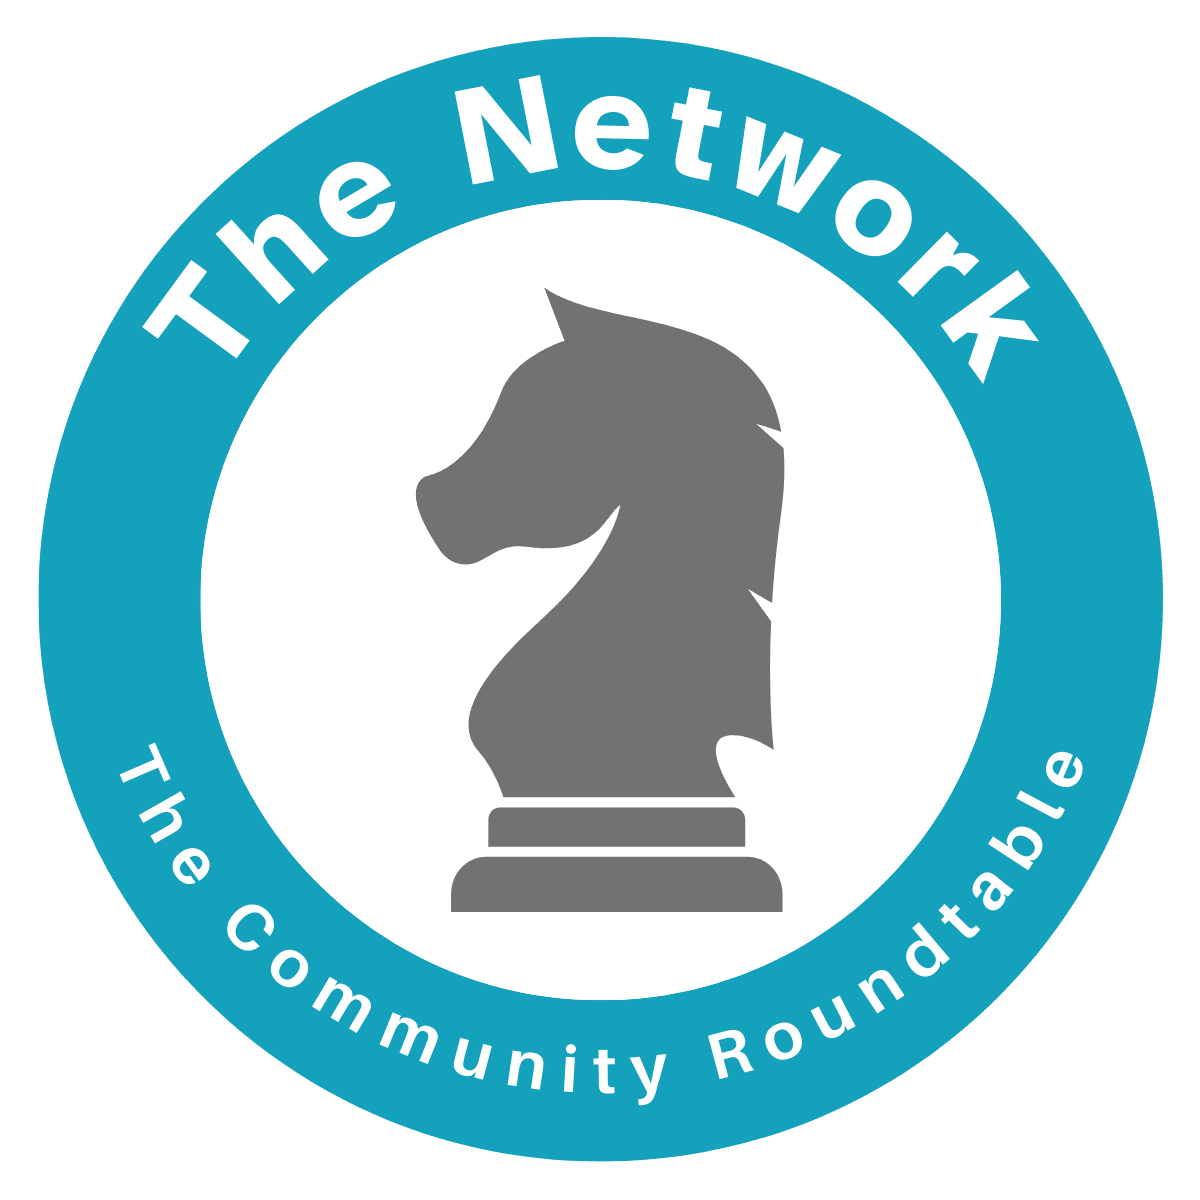 The Network - The world's premier resource for online community professionals.